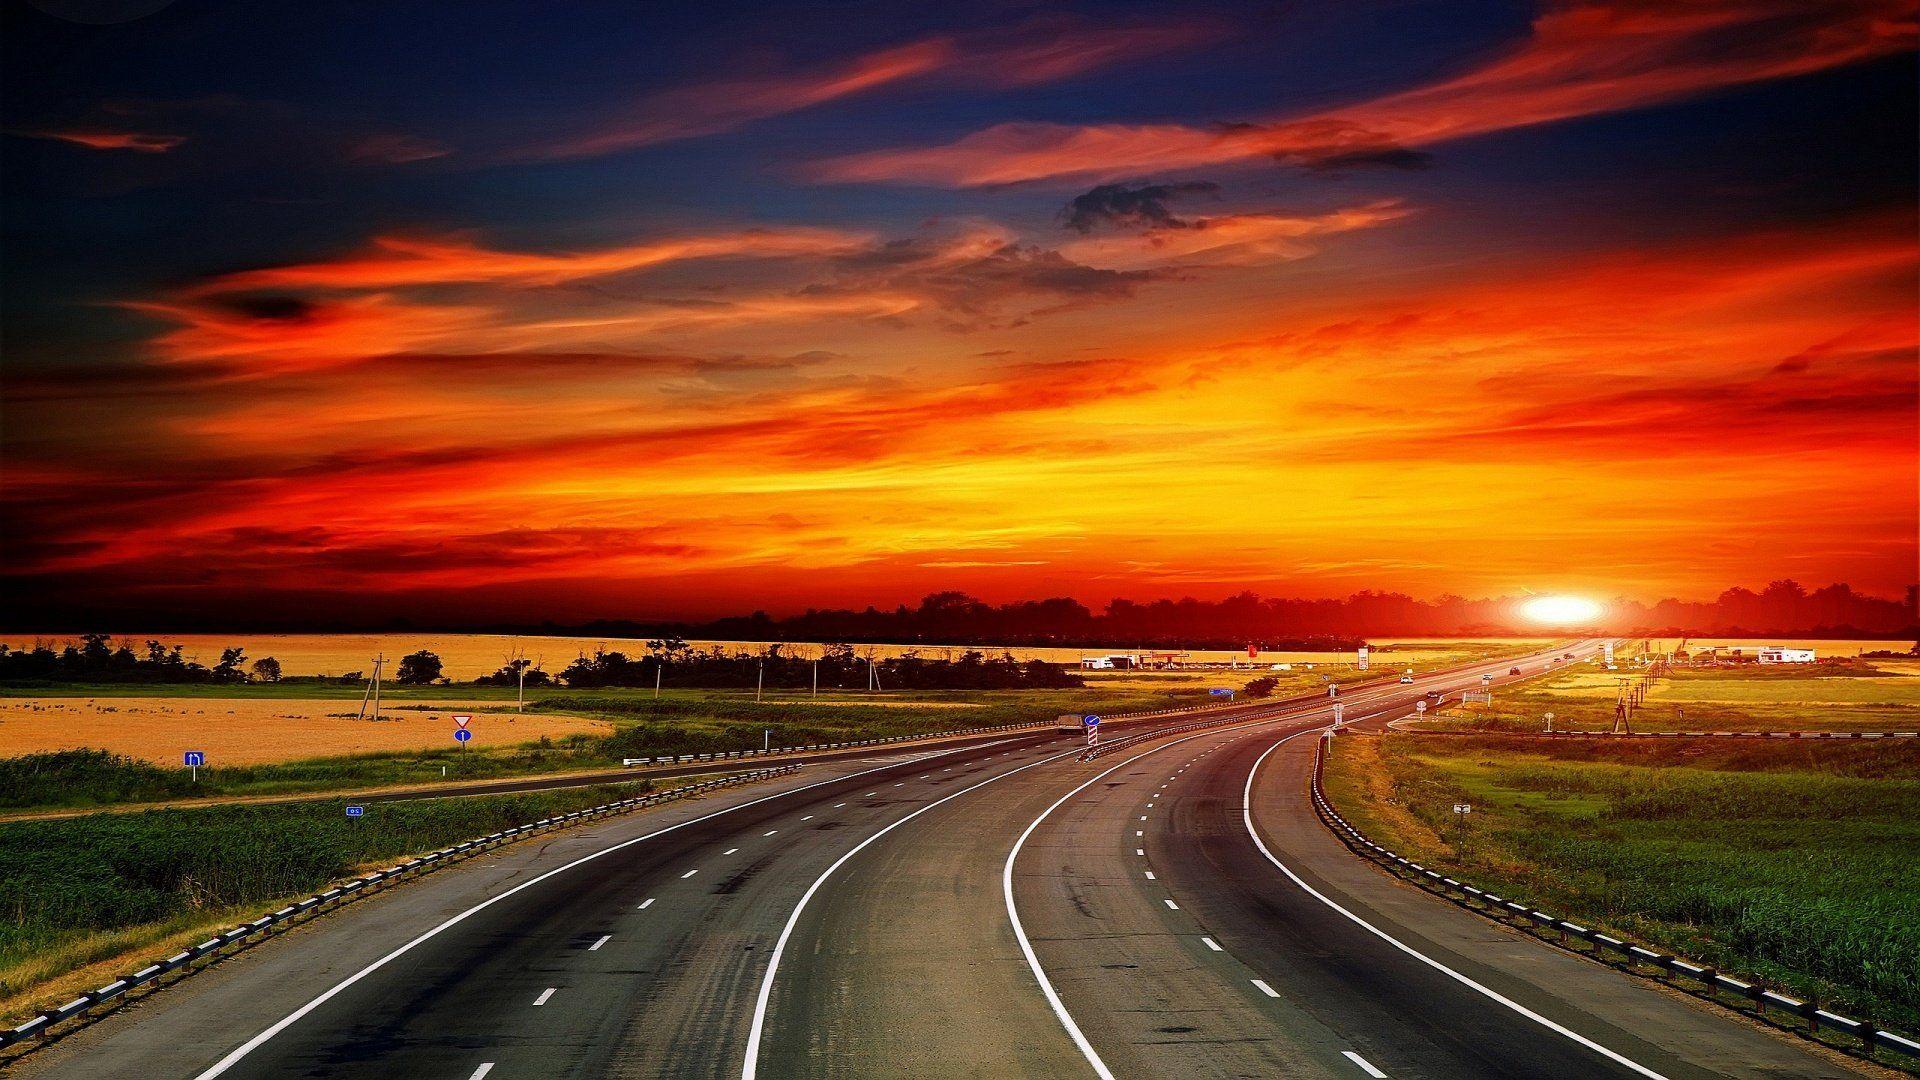 Free Highway Backgrounds & Highway Wallpapers Image in HD For